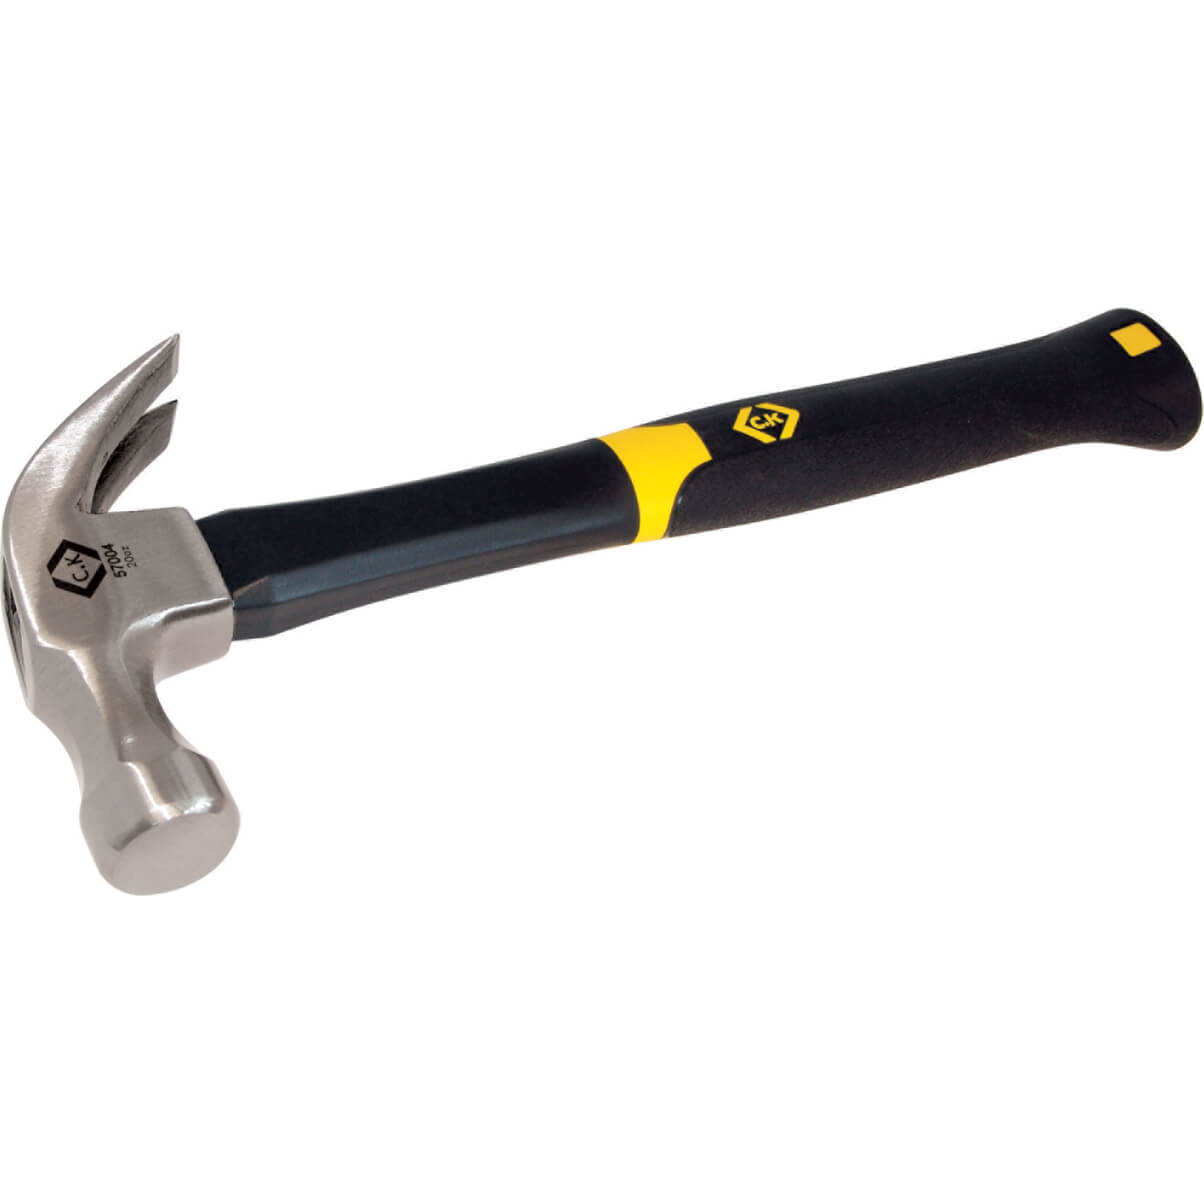 Image of CK Anti Vibe Claw Hammer 560g